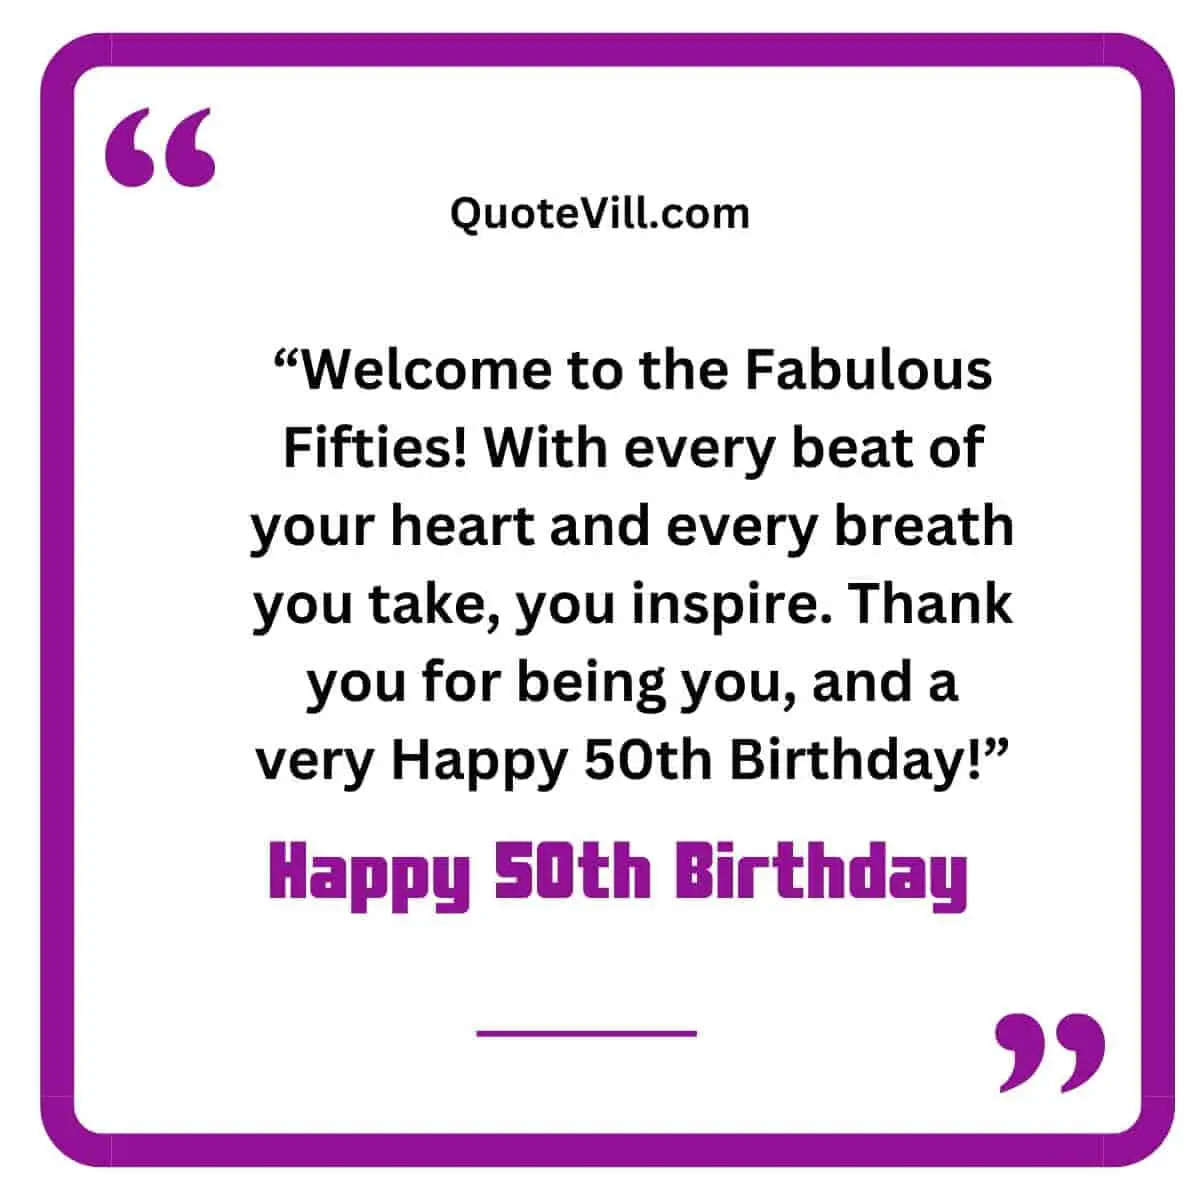 Welcome to the Fabulous Fifties! With every beat of your heart and every breath you take, you inspire. Thank you for being you, and a very Happy 50th Birthday!